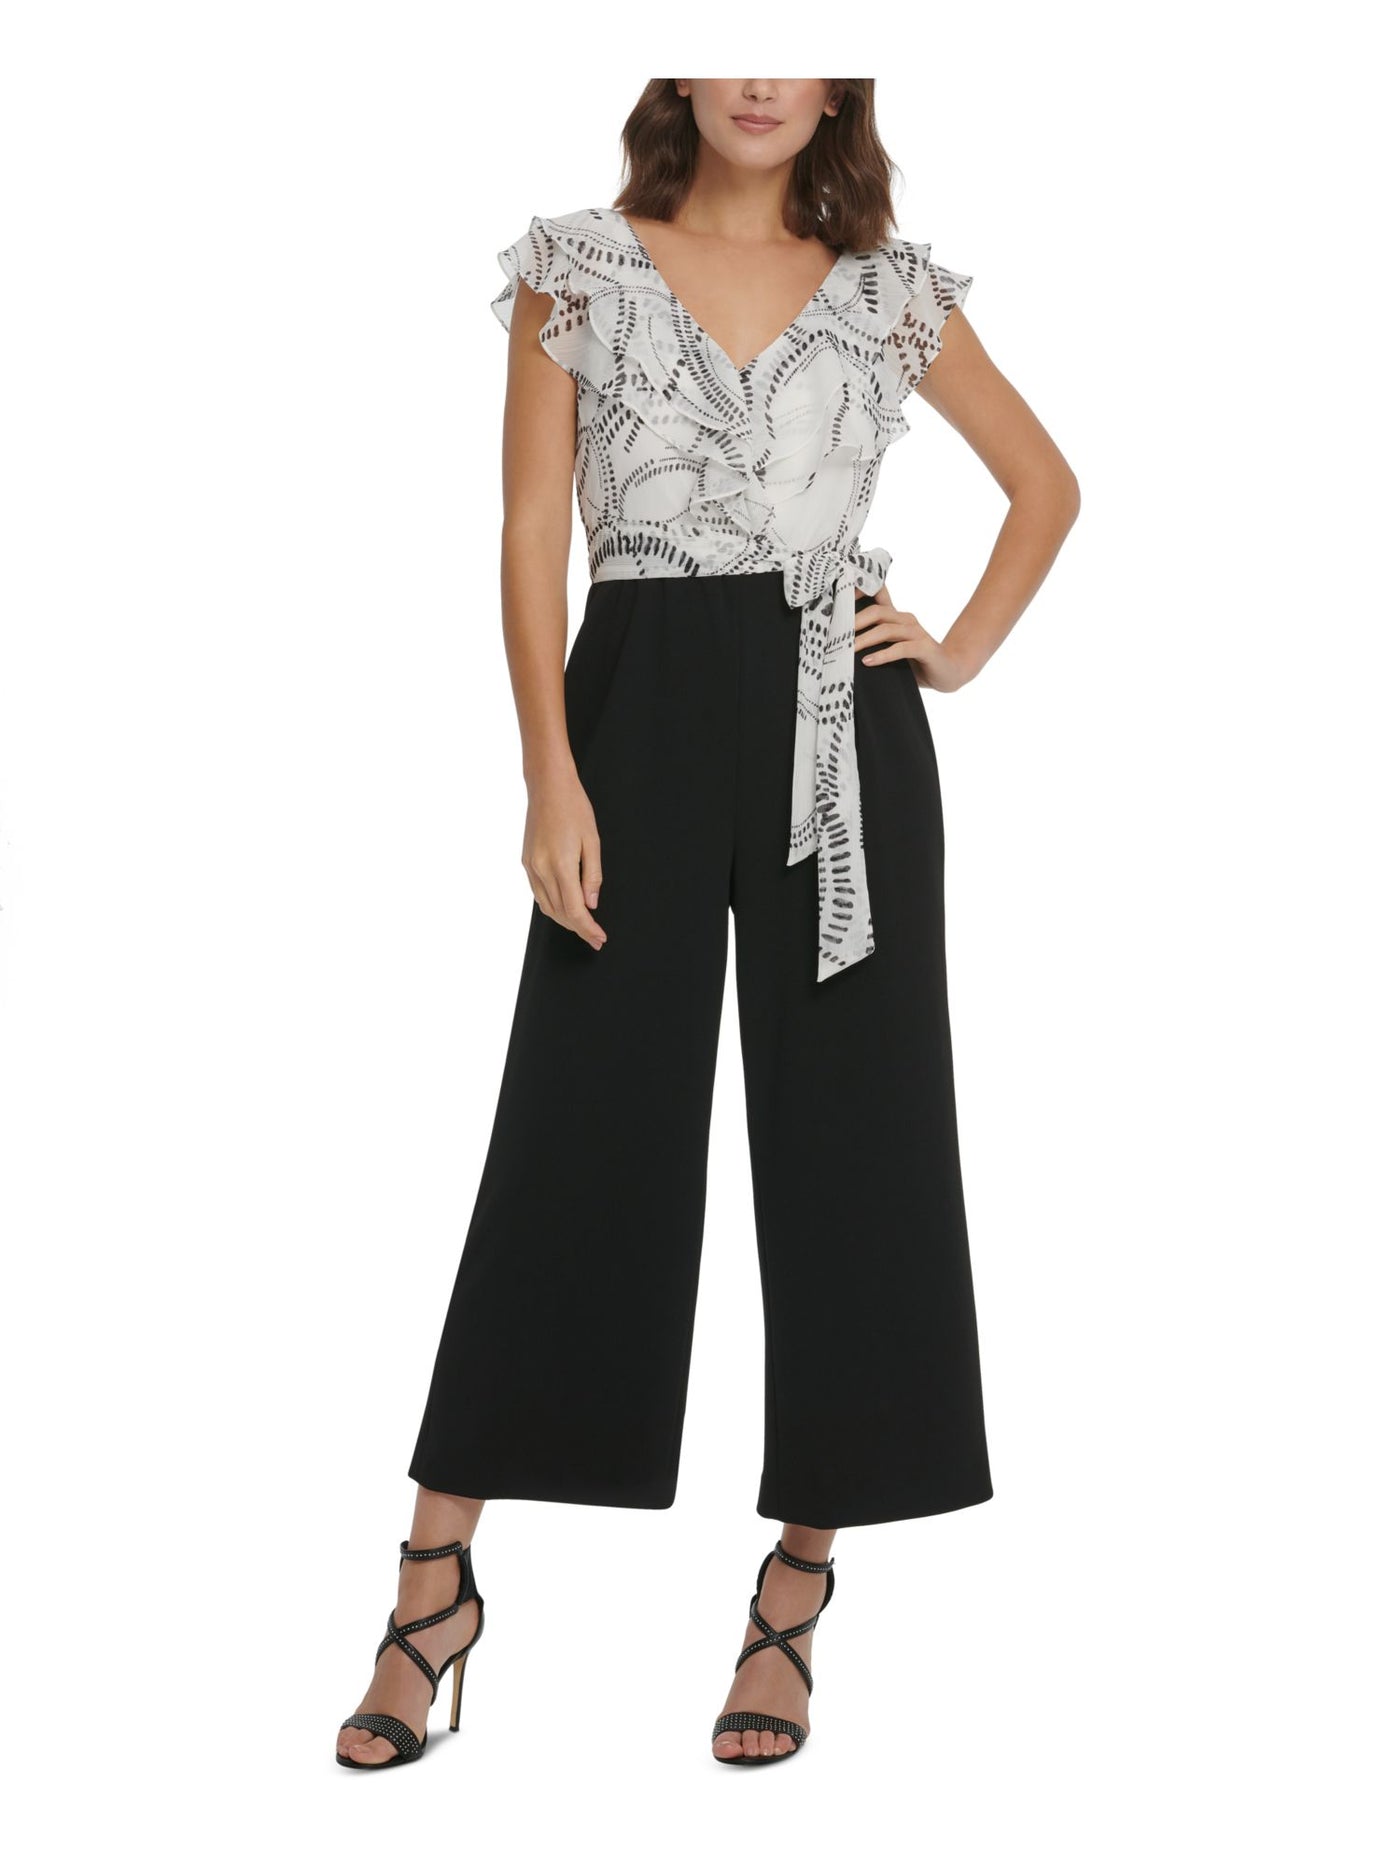 DKNY Womens Black Ruffled Printed Flutter Sleeve V Neck Party Cropped Jumpsuit 8